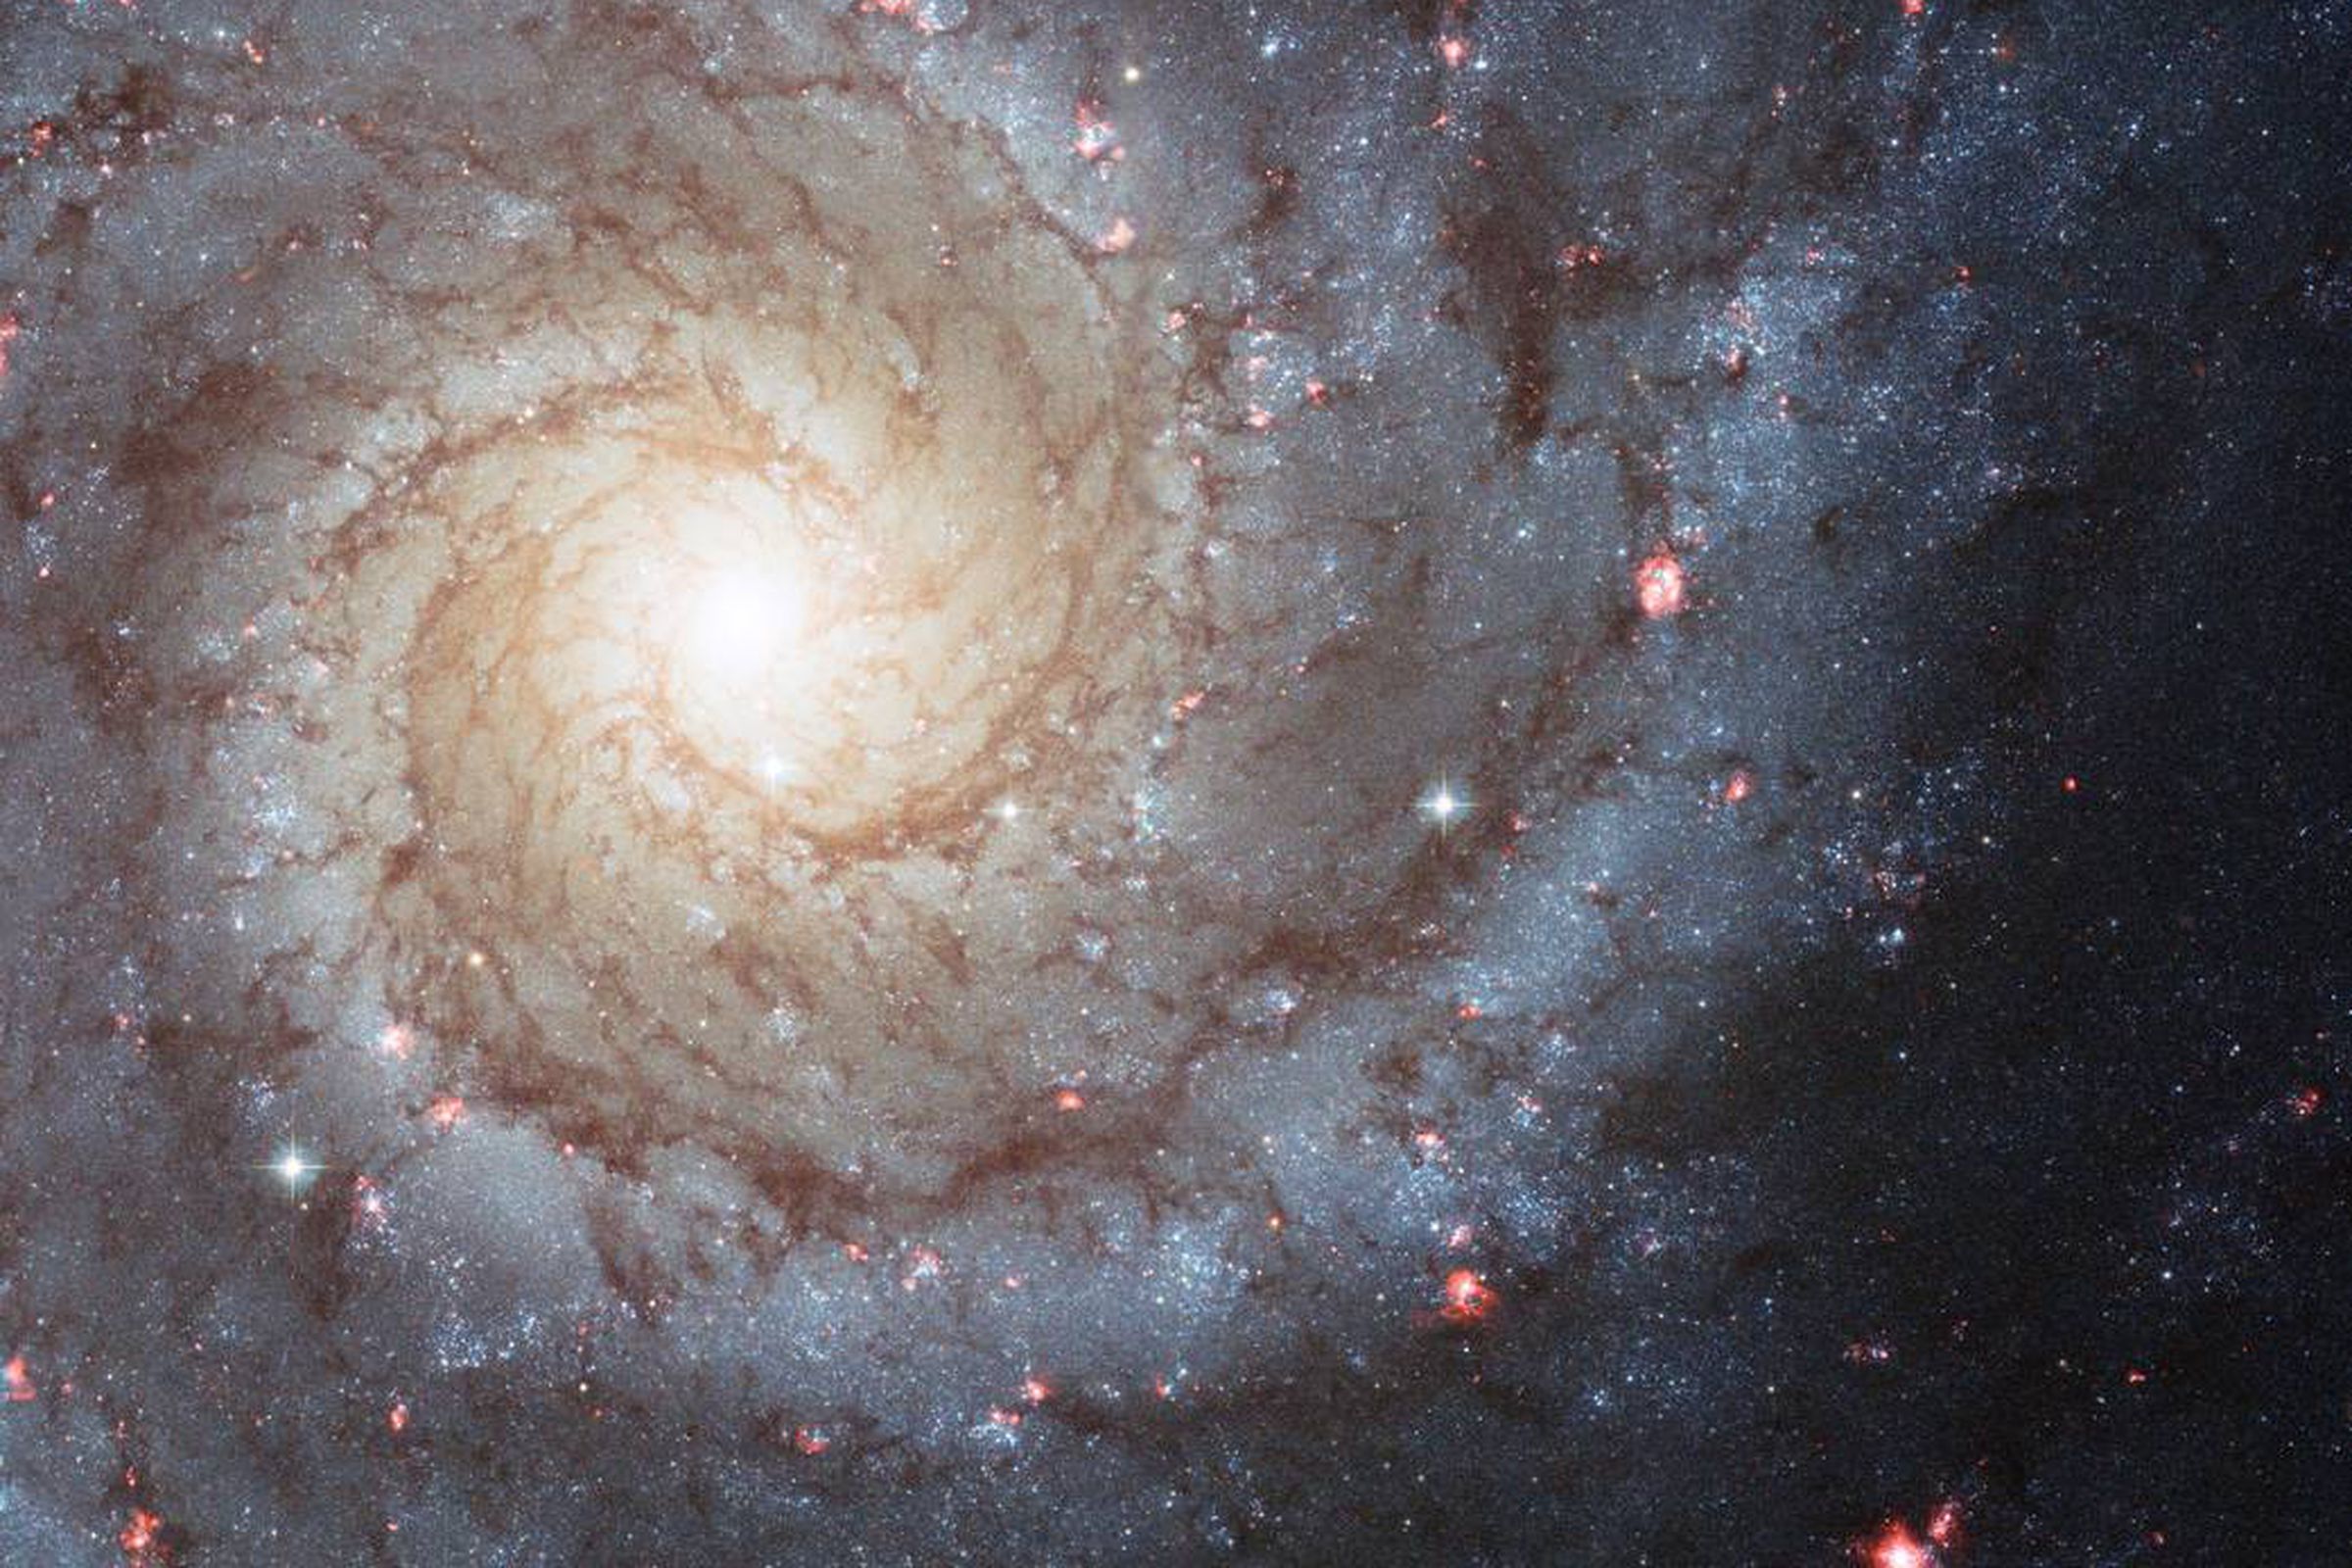 AI is helping to classify spiral galaxies like this one, and astronomers say there’s much more it can do.